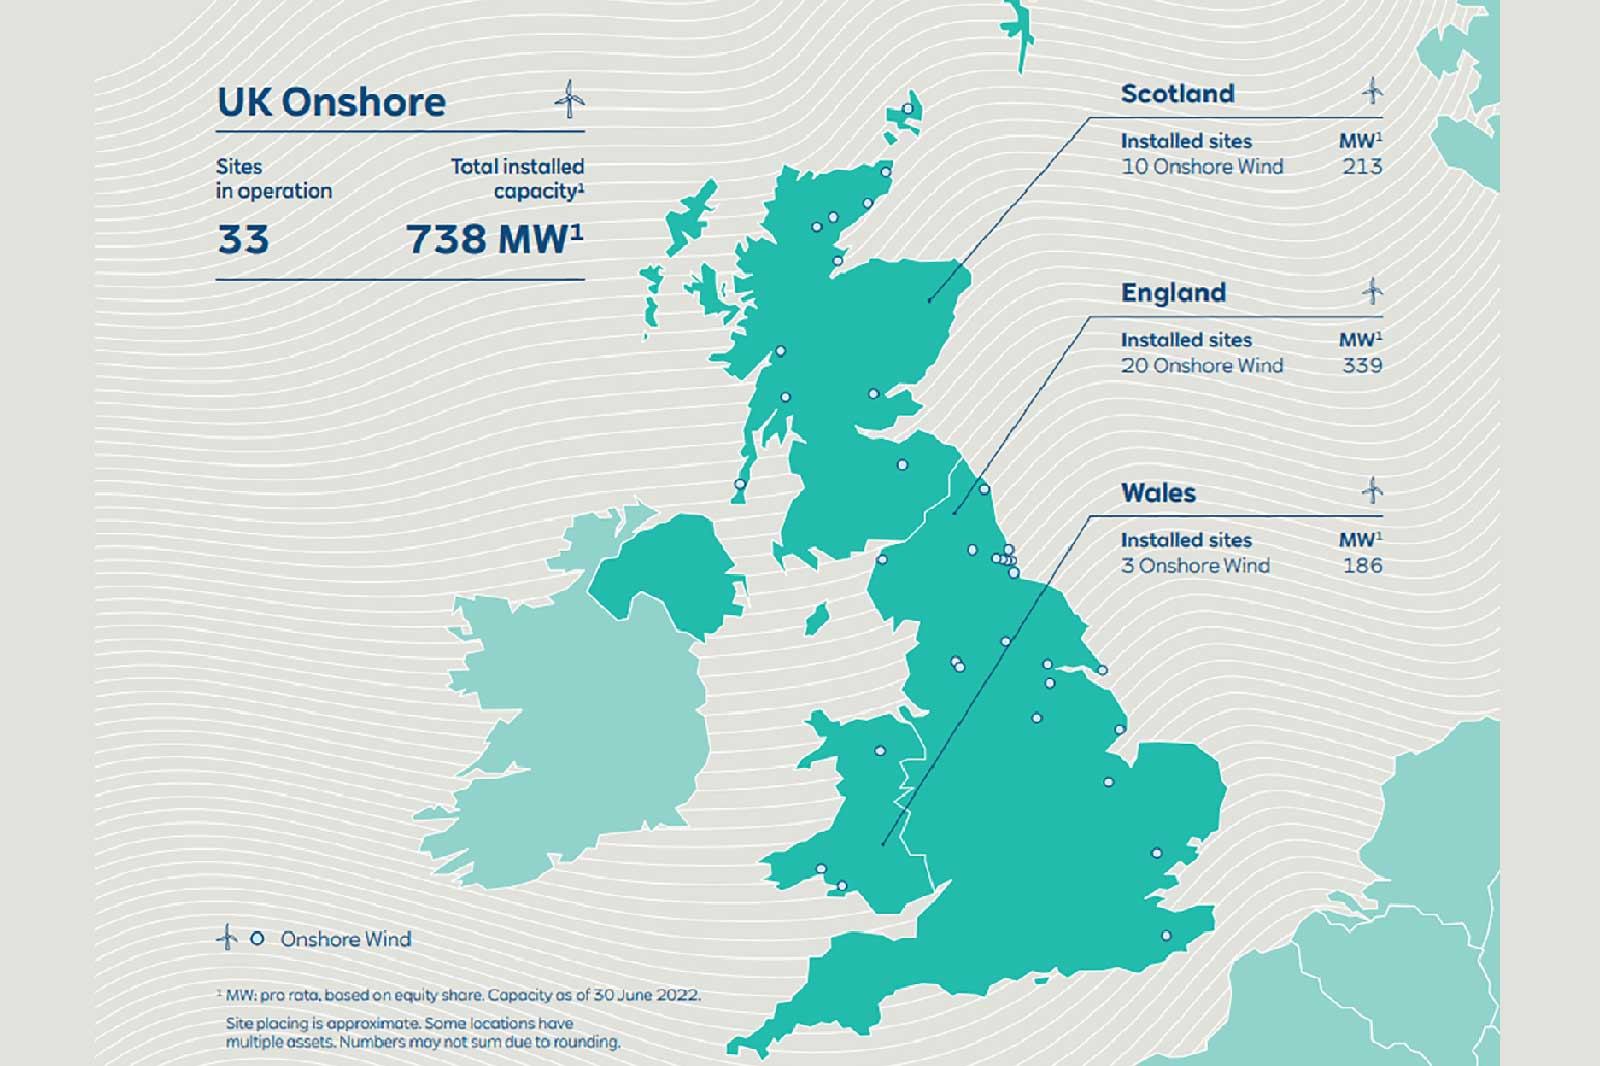 RWE onshore assets in the UK